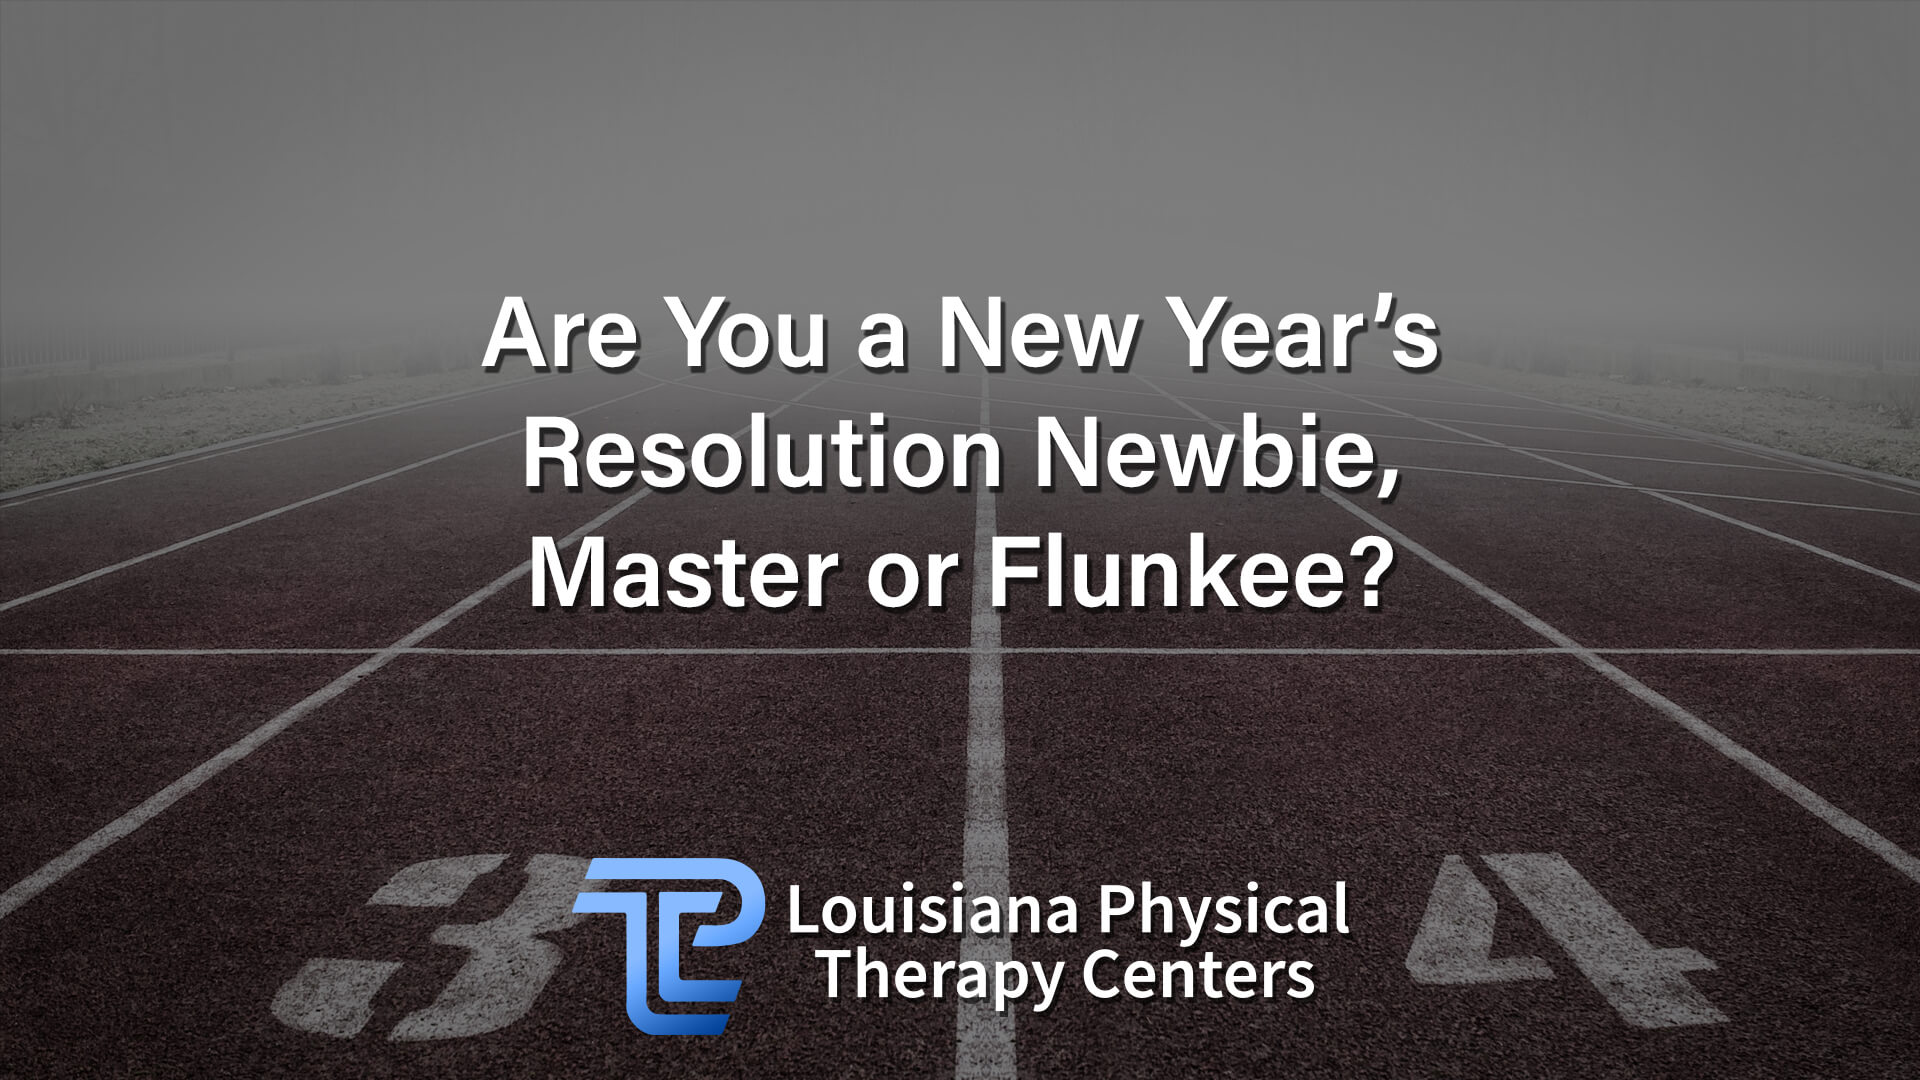 Are You a New Year’s Resolution Newbie, Master or Flunkee